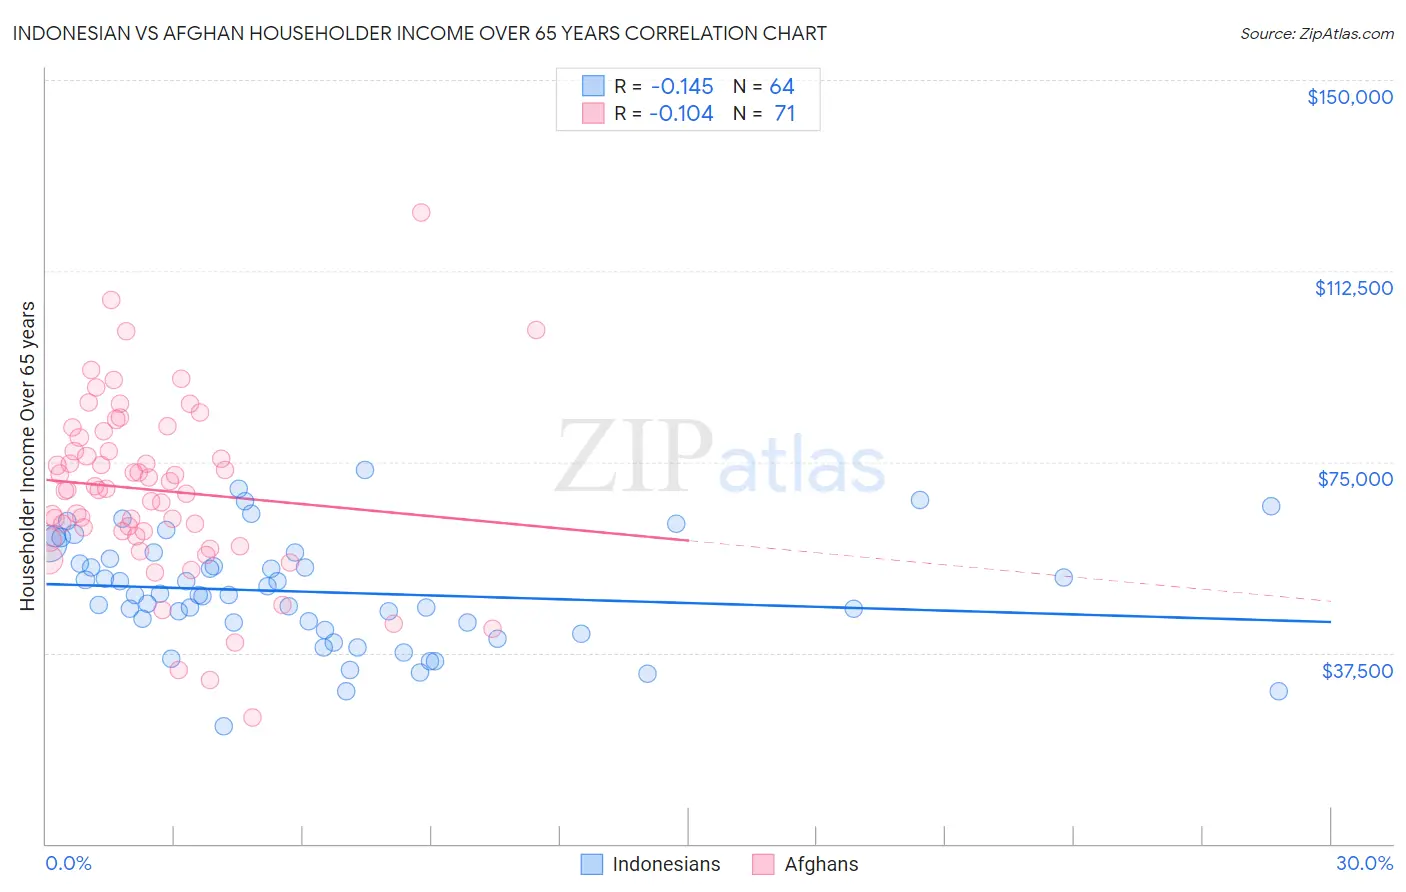 Indonesian vs Afghan Householder Income Over 65 years